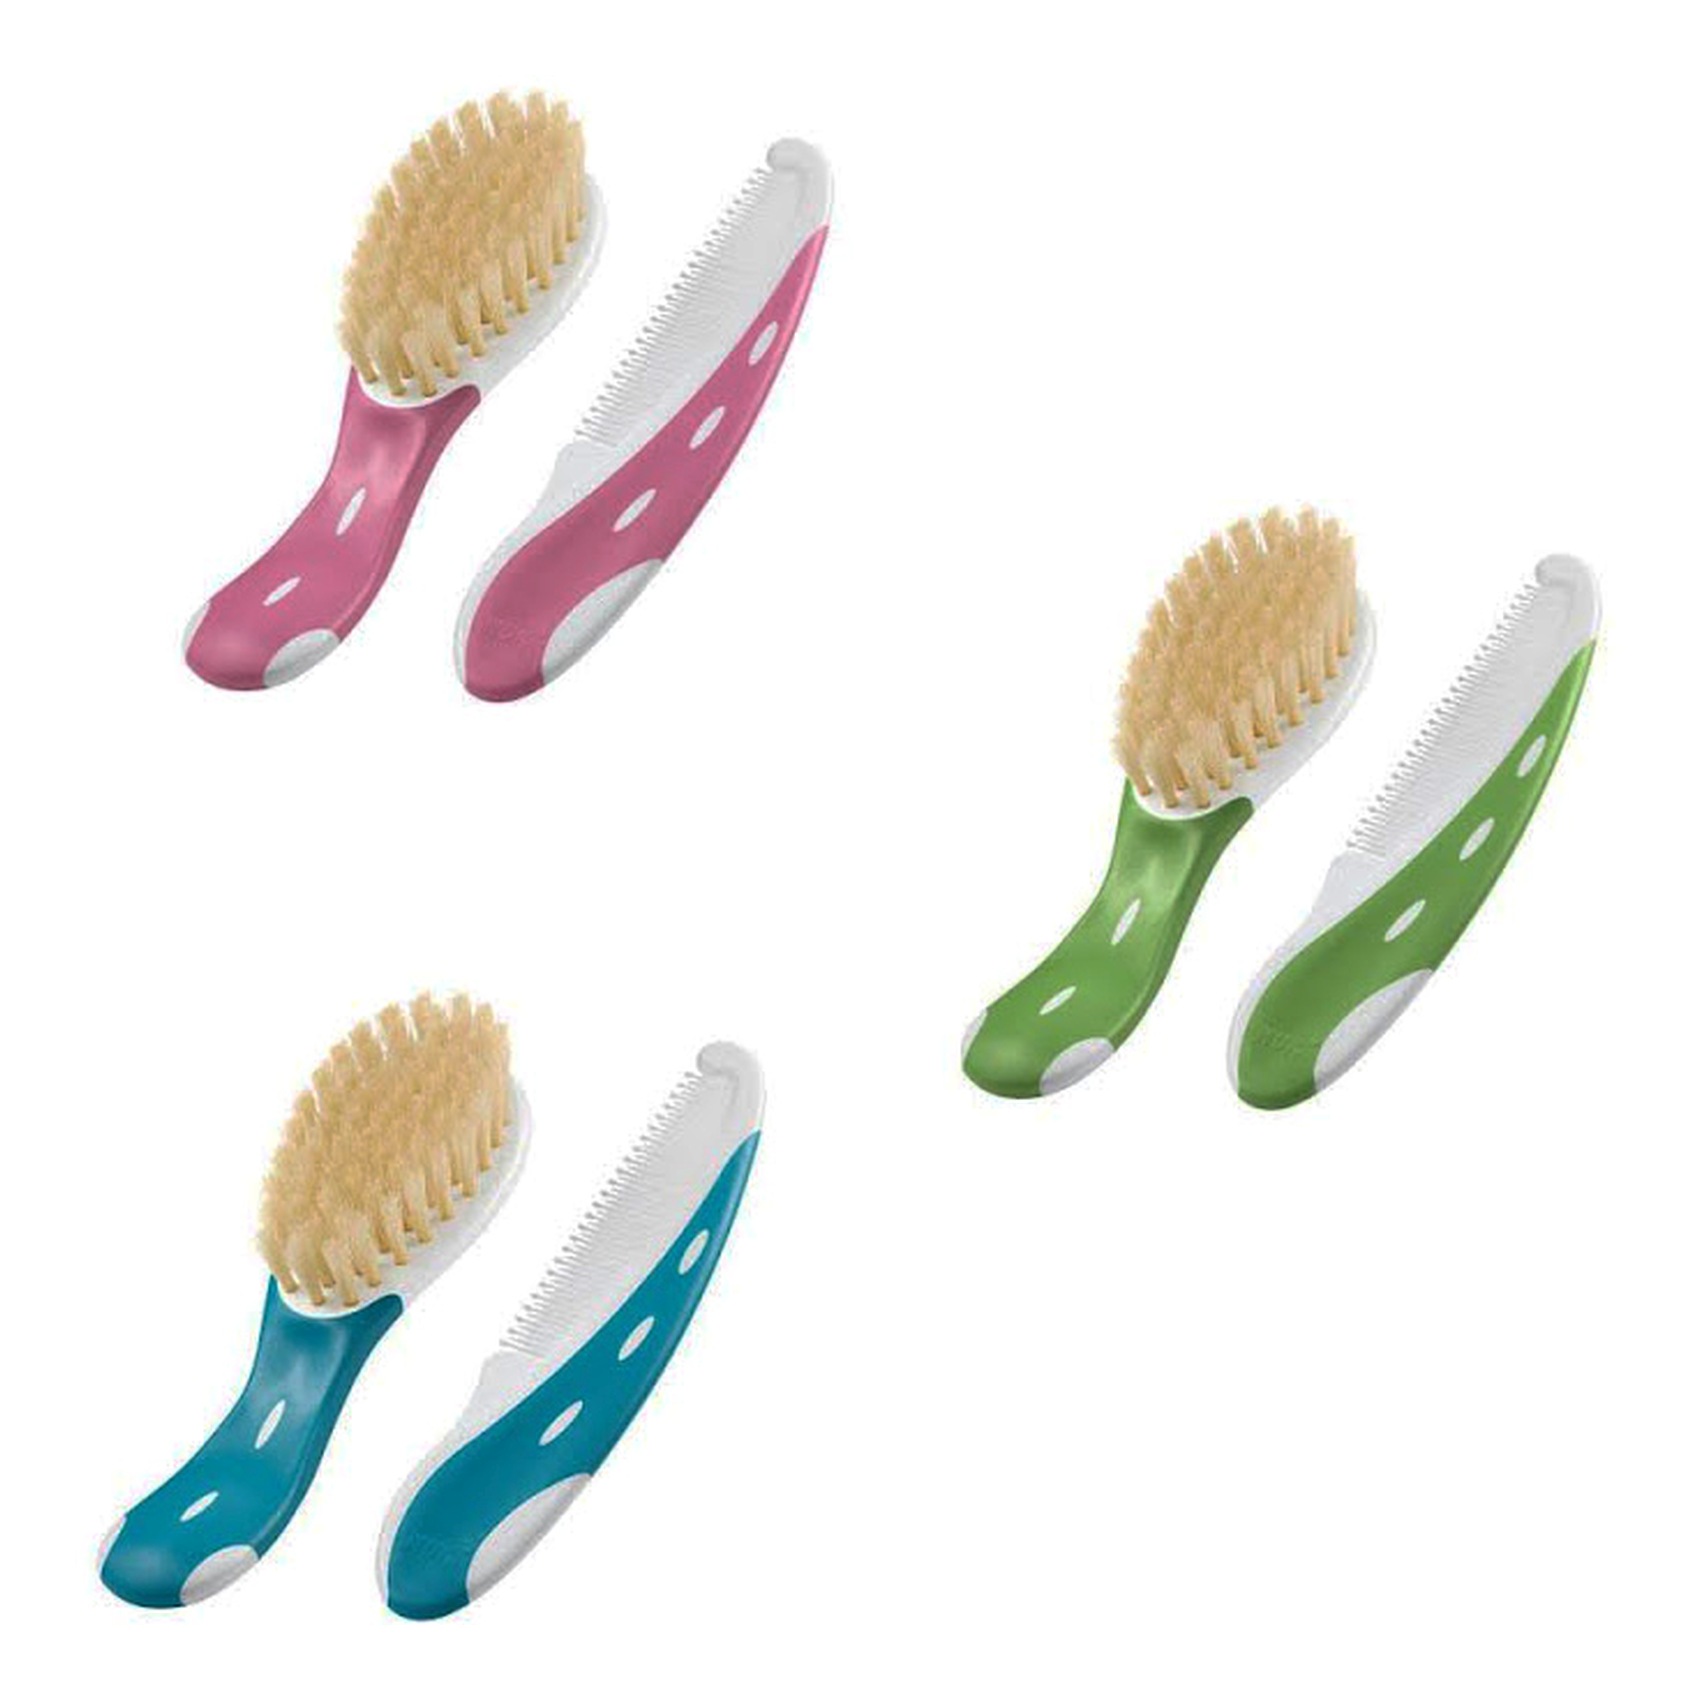 Nuk Baby Brush With Comb 0029142 Multicolour